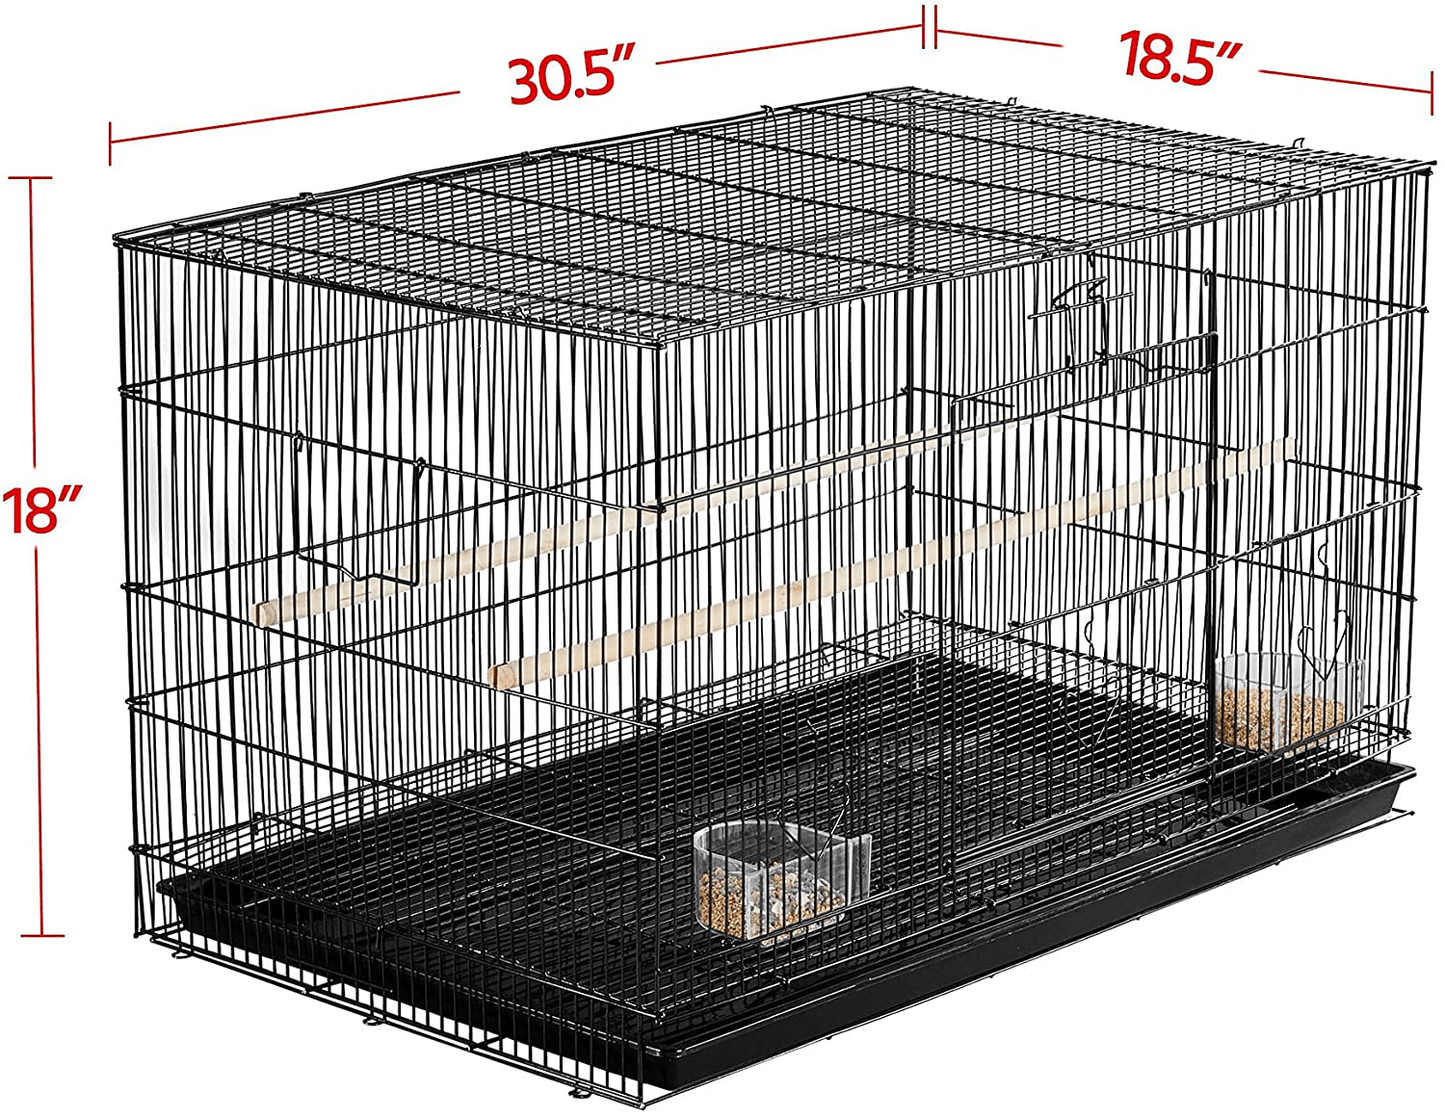 Yaheetech 30-Inch Rectangle Stackable Breeding Flight Parakeet Bird Cage for Finches Budgies Cockatiels Conures Lovebirds Canaries Parrots W/Slide-Out Tray, Black